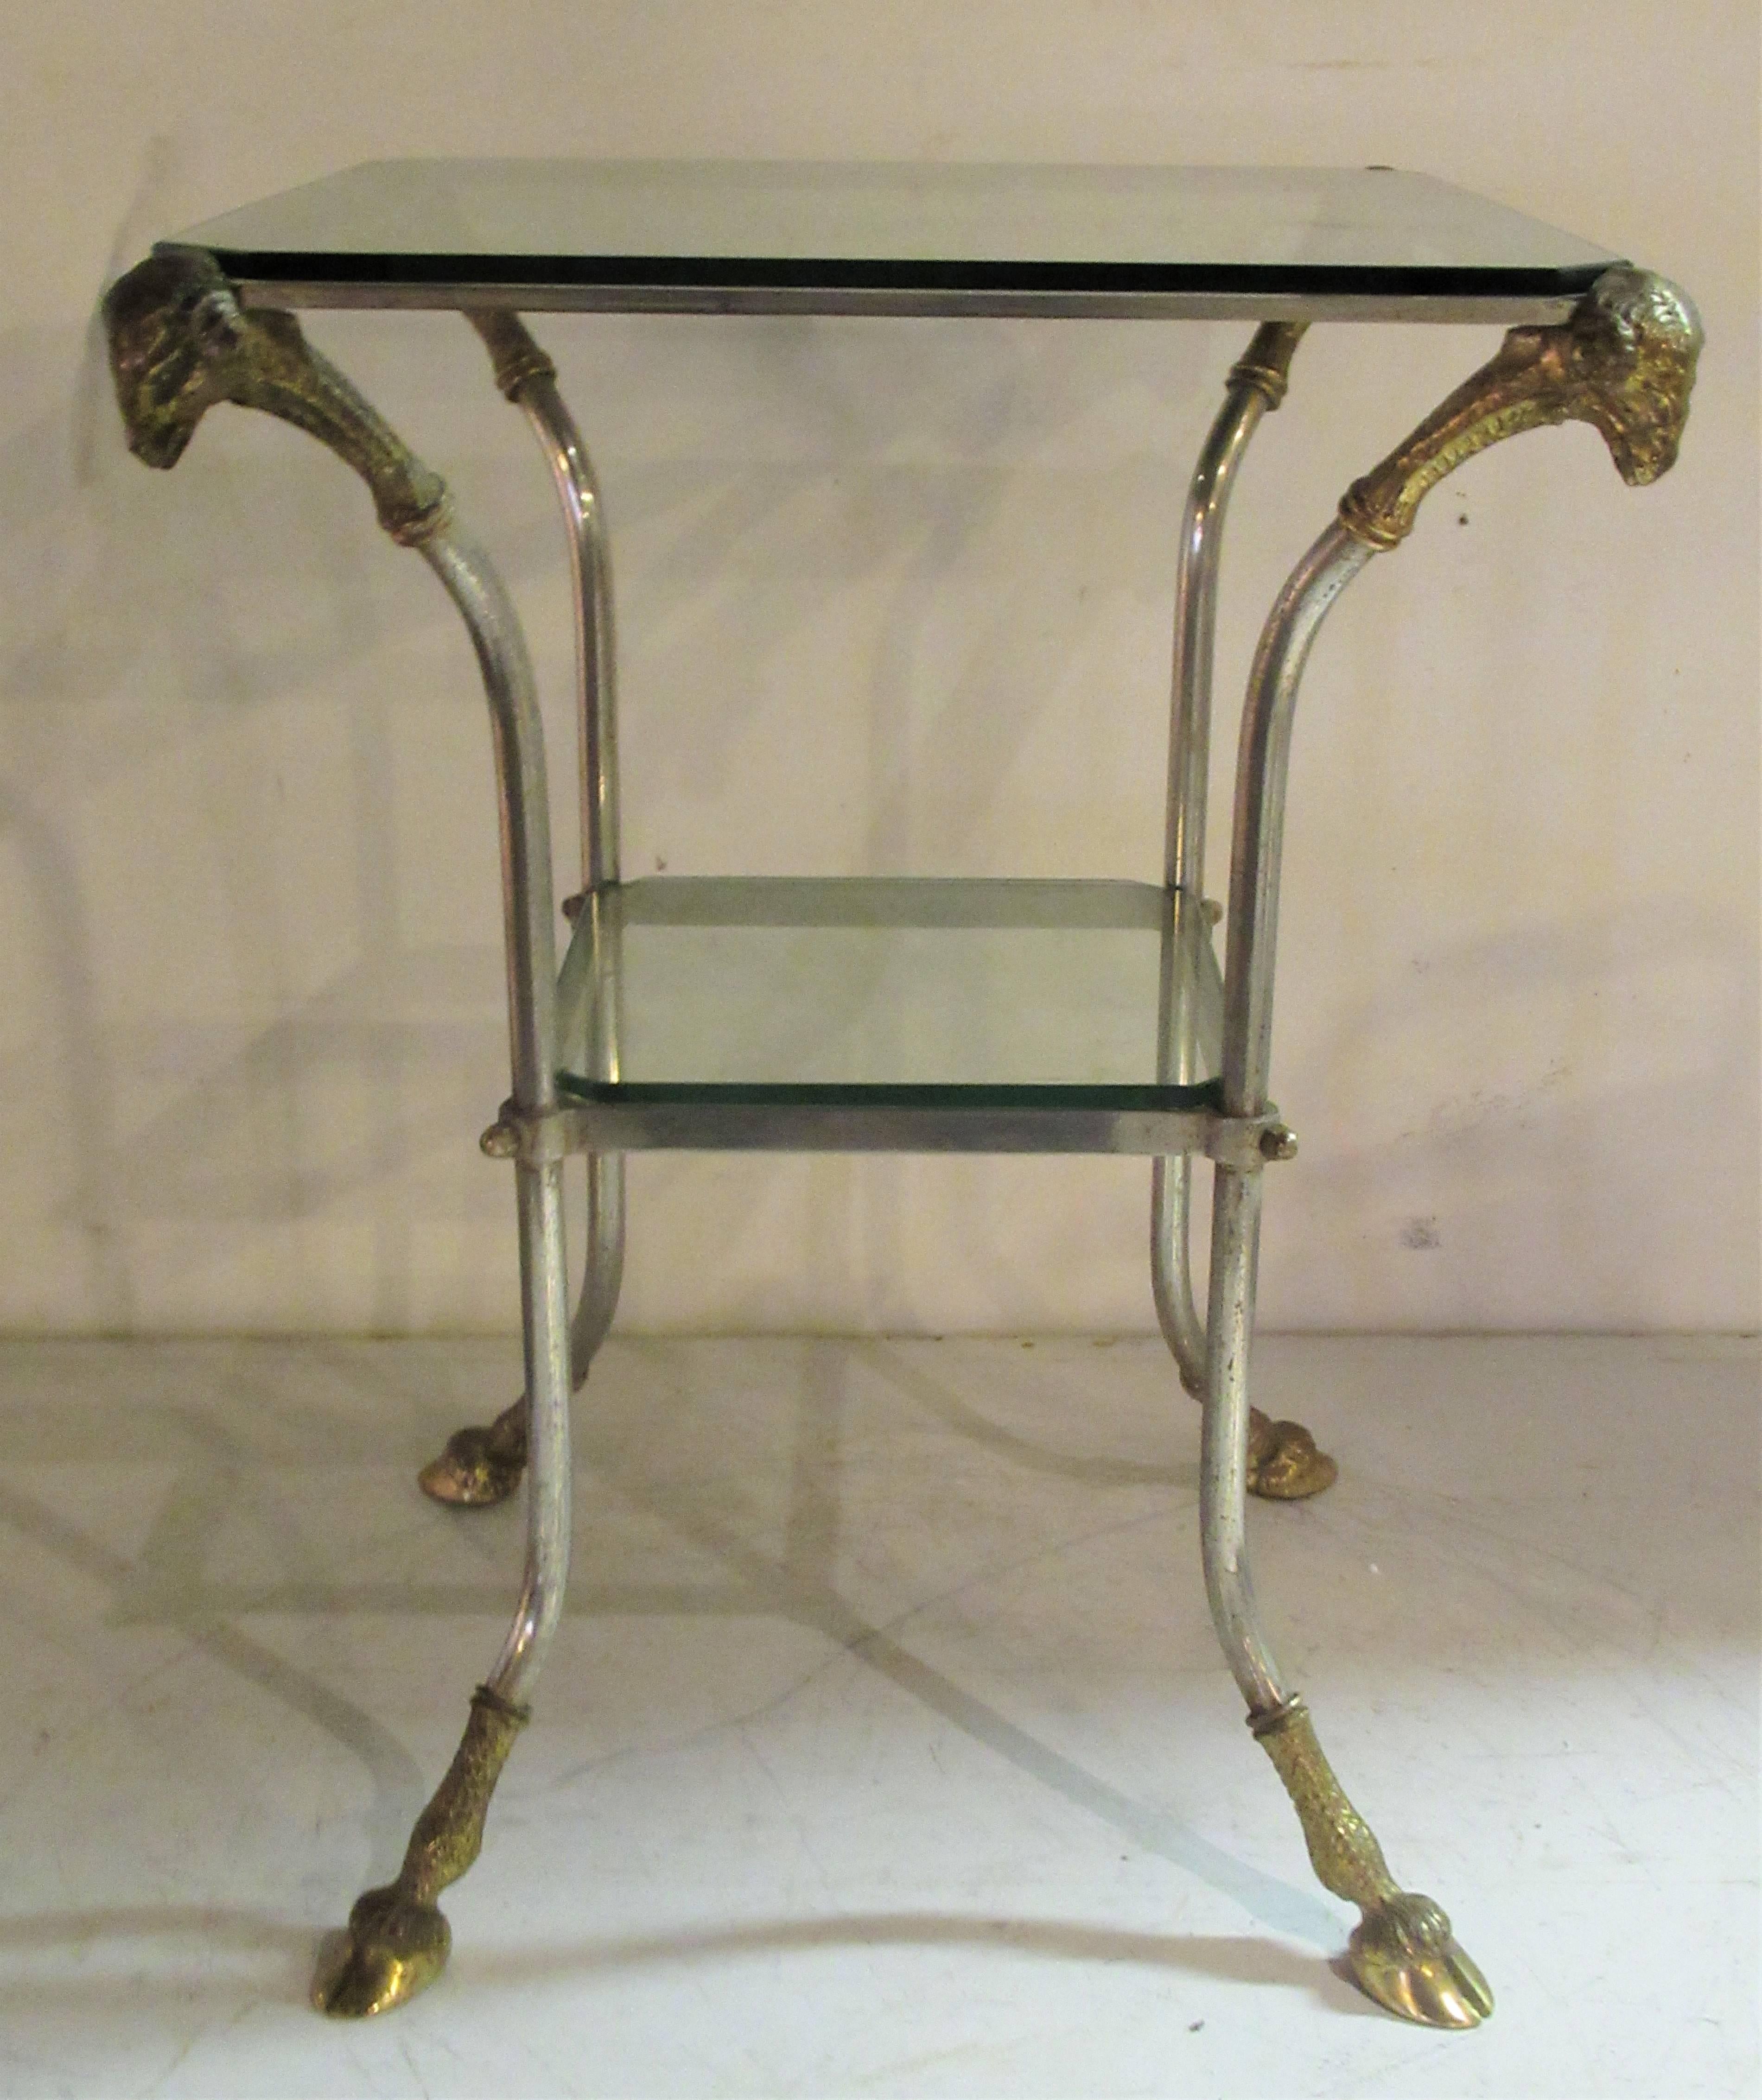 Neoclassical style steel frame two tier fitted plate glass table ( glass top / lower shelf with glass - see picture 2 )  with large gilt brass bronze rams heads and cloven hoof feet. Italian - in the style of Maison Jansen, circa 1960.